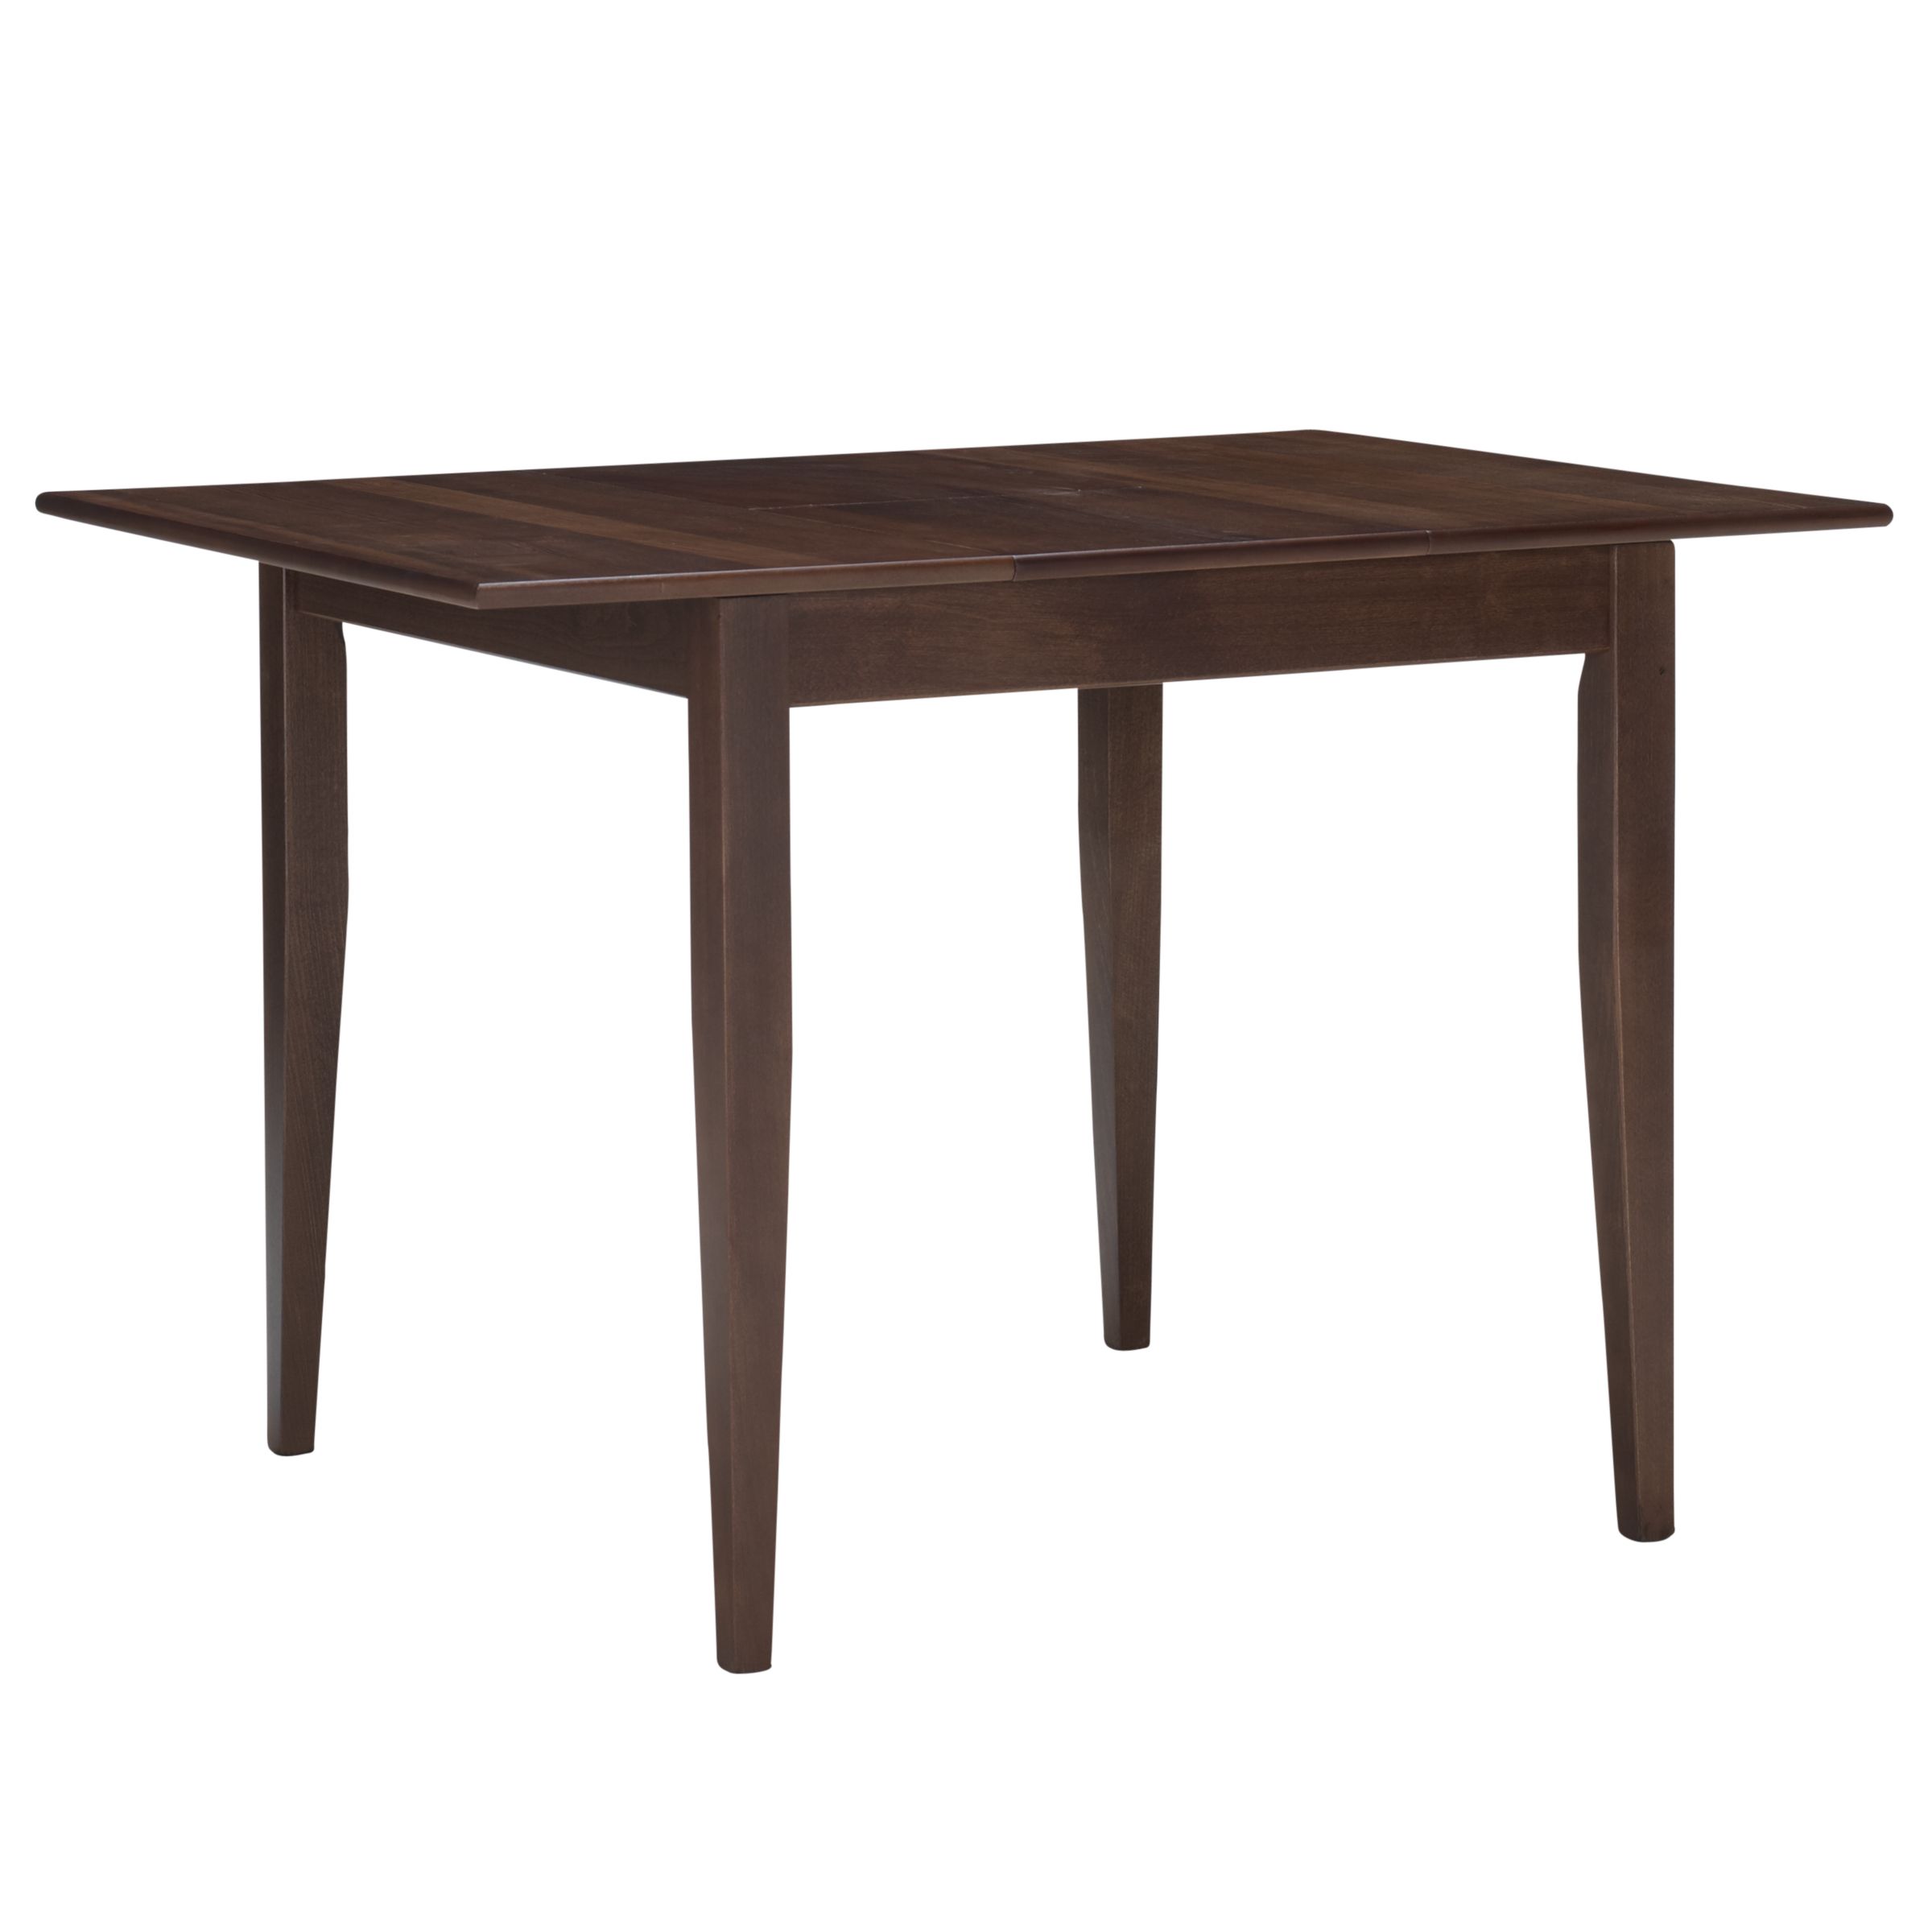 Lacock Square Extending Dining Table,